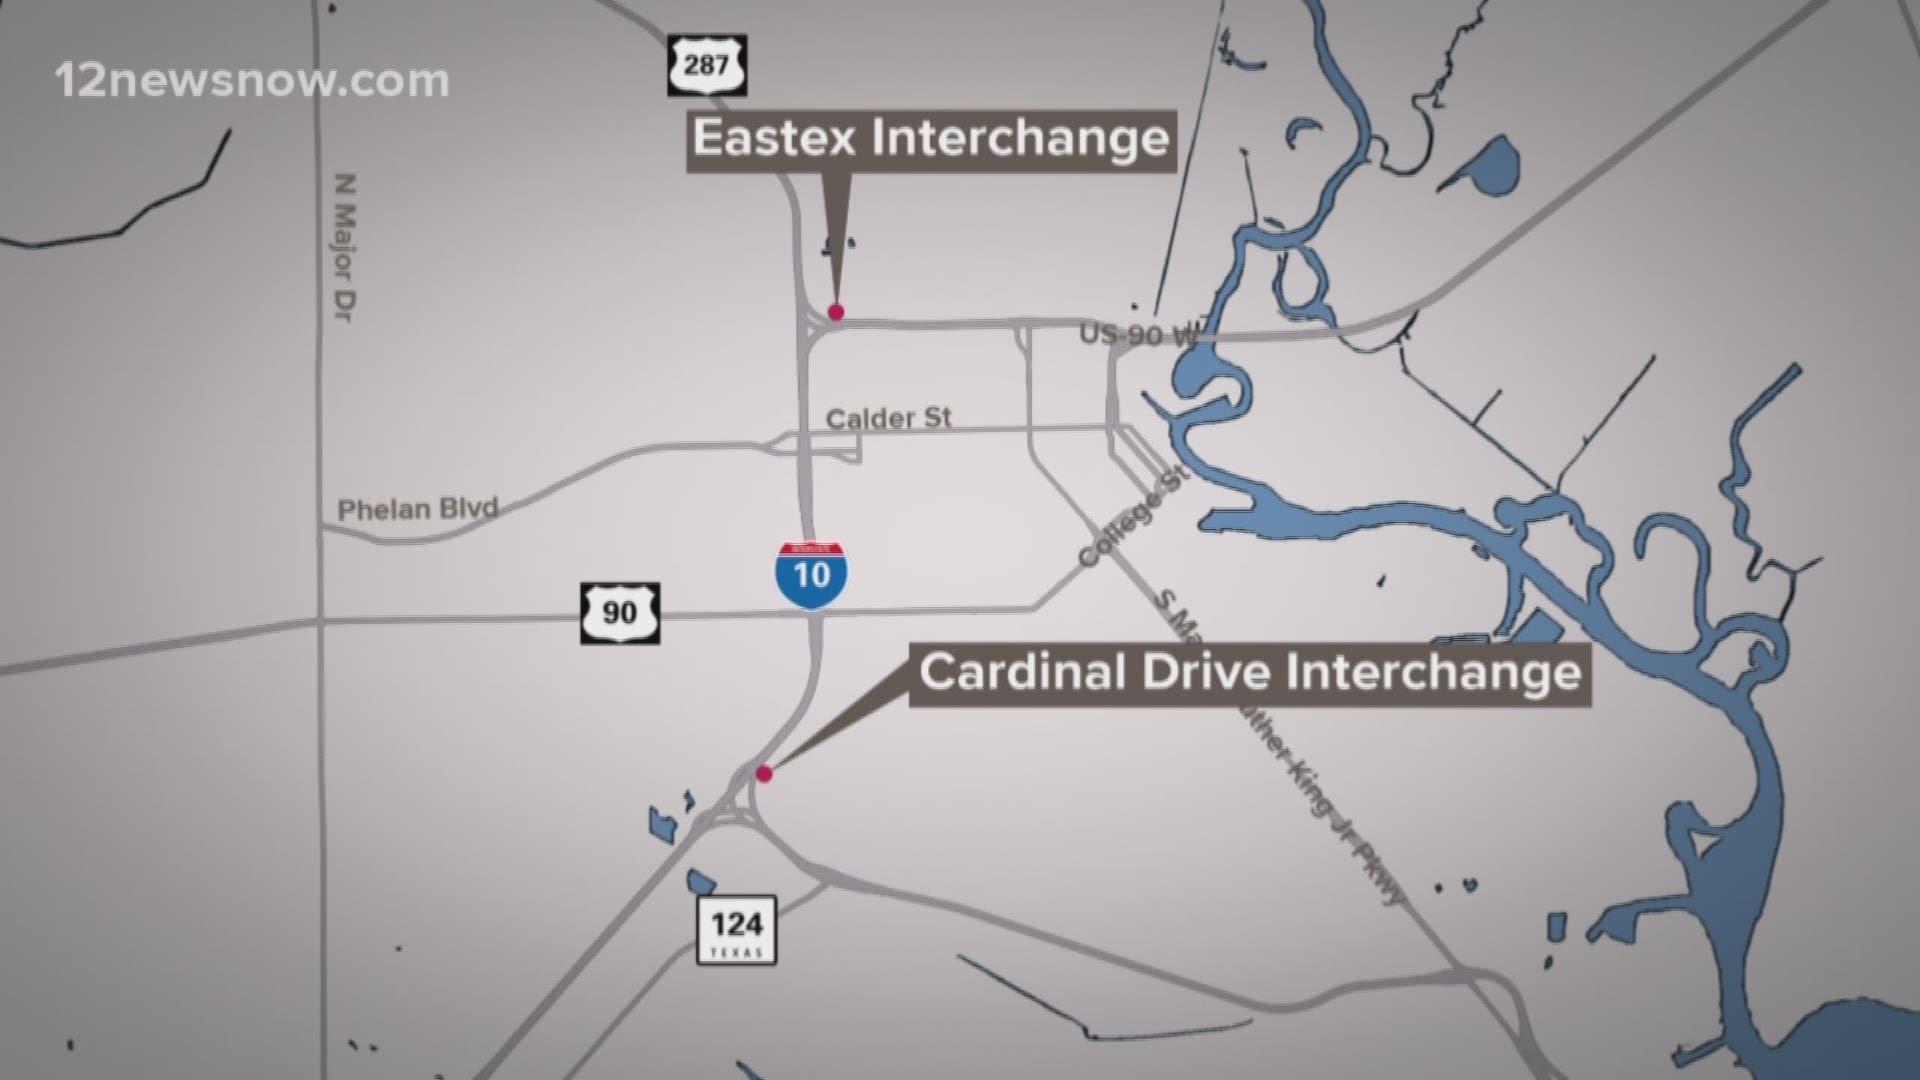 The forum will be held at Beaumont Civic Center from five until seven, where they will discuss the plans to reshape I-10, including interchanges on Cardinal Drive and Eastex Freeway. The project will last years but could bring more lanes and new exit ramps through Beaumont.